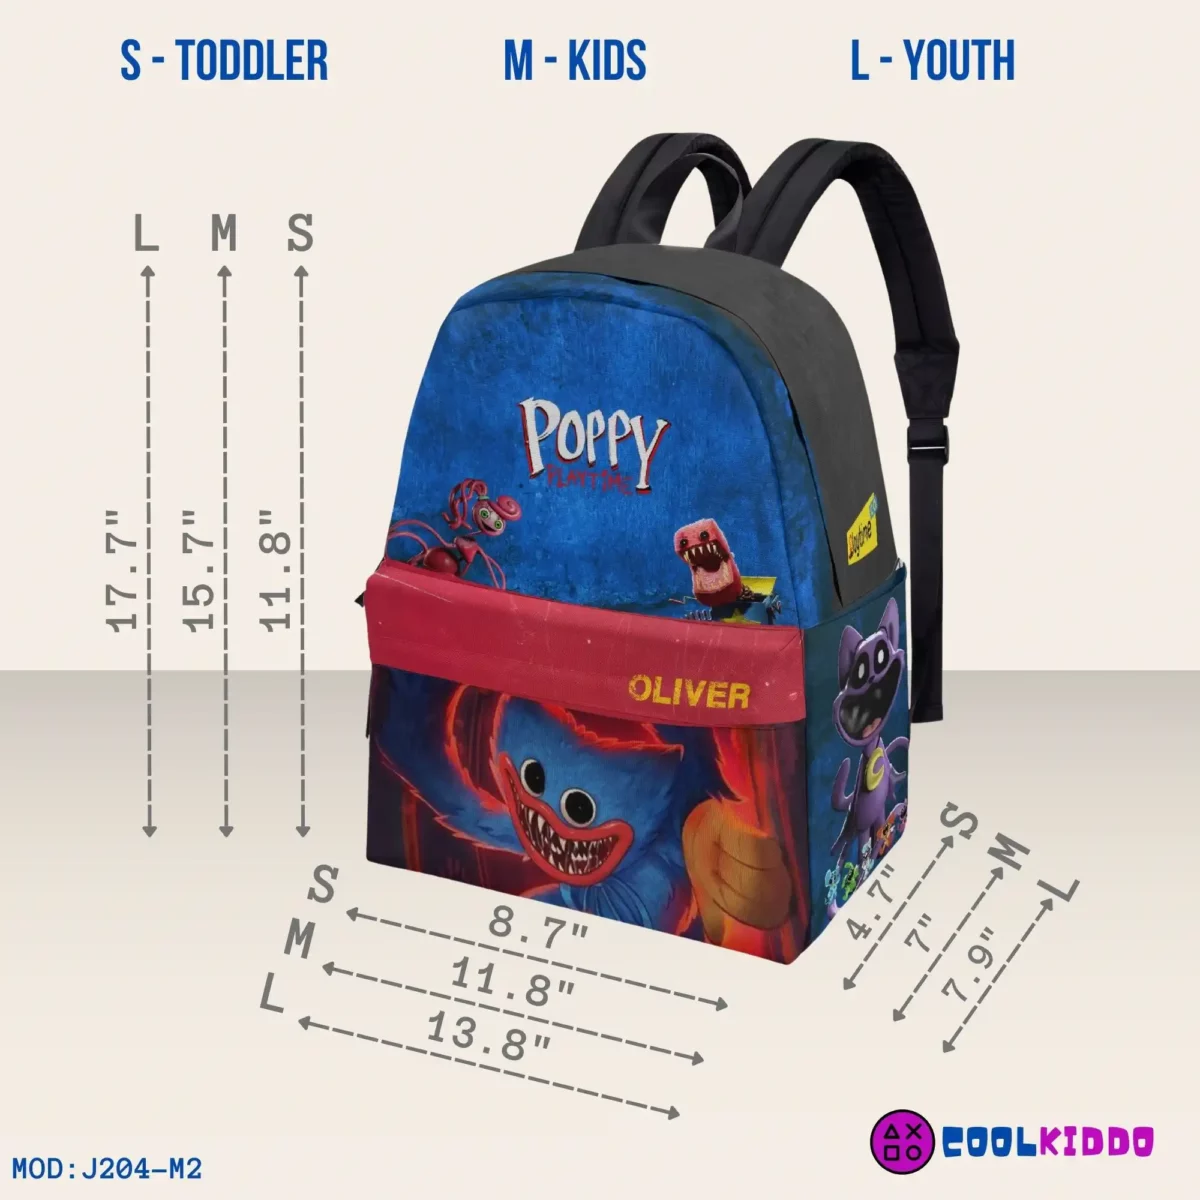 Poppy Playtime Videogame Inspired Bag – Ideal for School, Travel, and Sports Essentials, Three Sizes Cool Kiddo 20